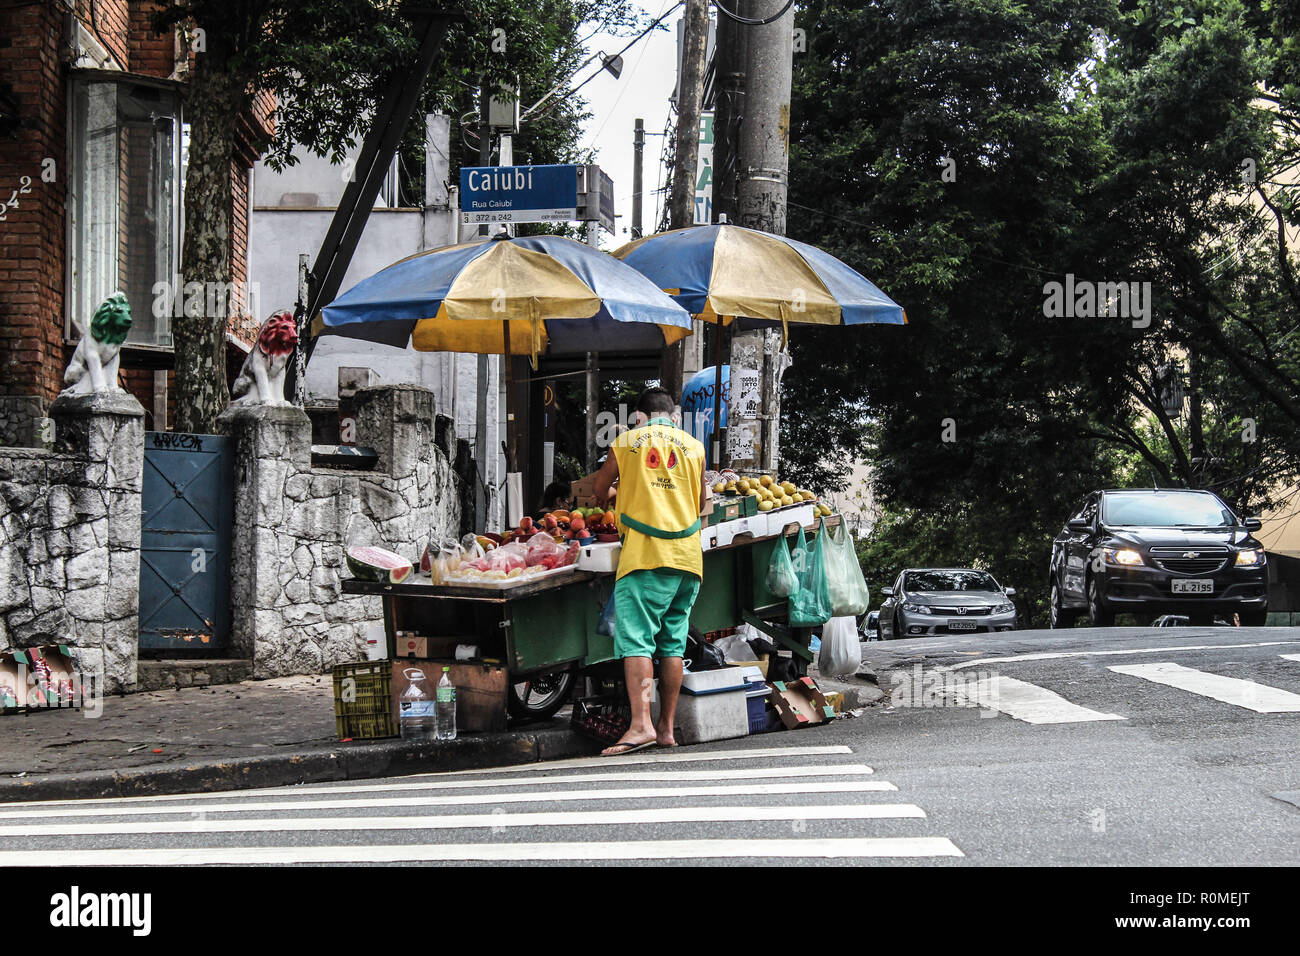 SÃO PAULO, SP - 06.11.2018: TRABALHO INFORMAL BATE RECORDE NO BRASIL - There are growing numbers of street vendors and self-employed workers in Brazil. According to data from the National Survey for Household Sample Continuous, released by the IBGE last week, Brazil broke the record for the number of people in the informal sector. It is estimated that 35 million Brazilian citizens are currently in informal activities, of which 11.5 million are without a formal contract and 23.5 million are self-employed. In the photo, walking with fruit stand in the neighborhood of Perdizes, west of São Paulo, Stock Photo